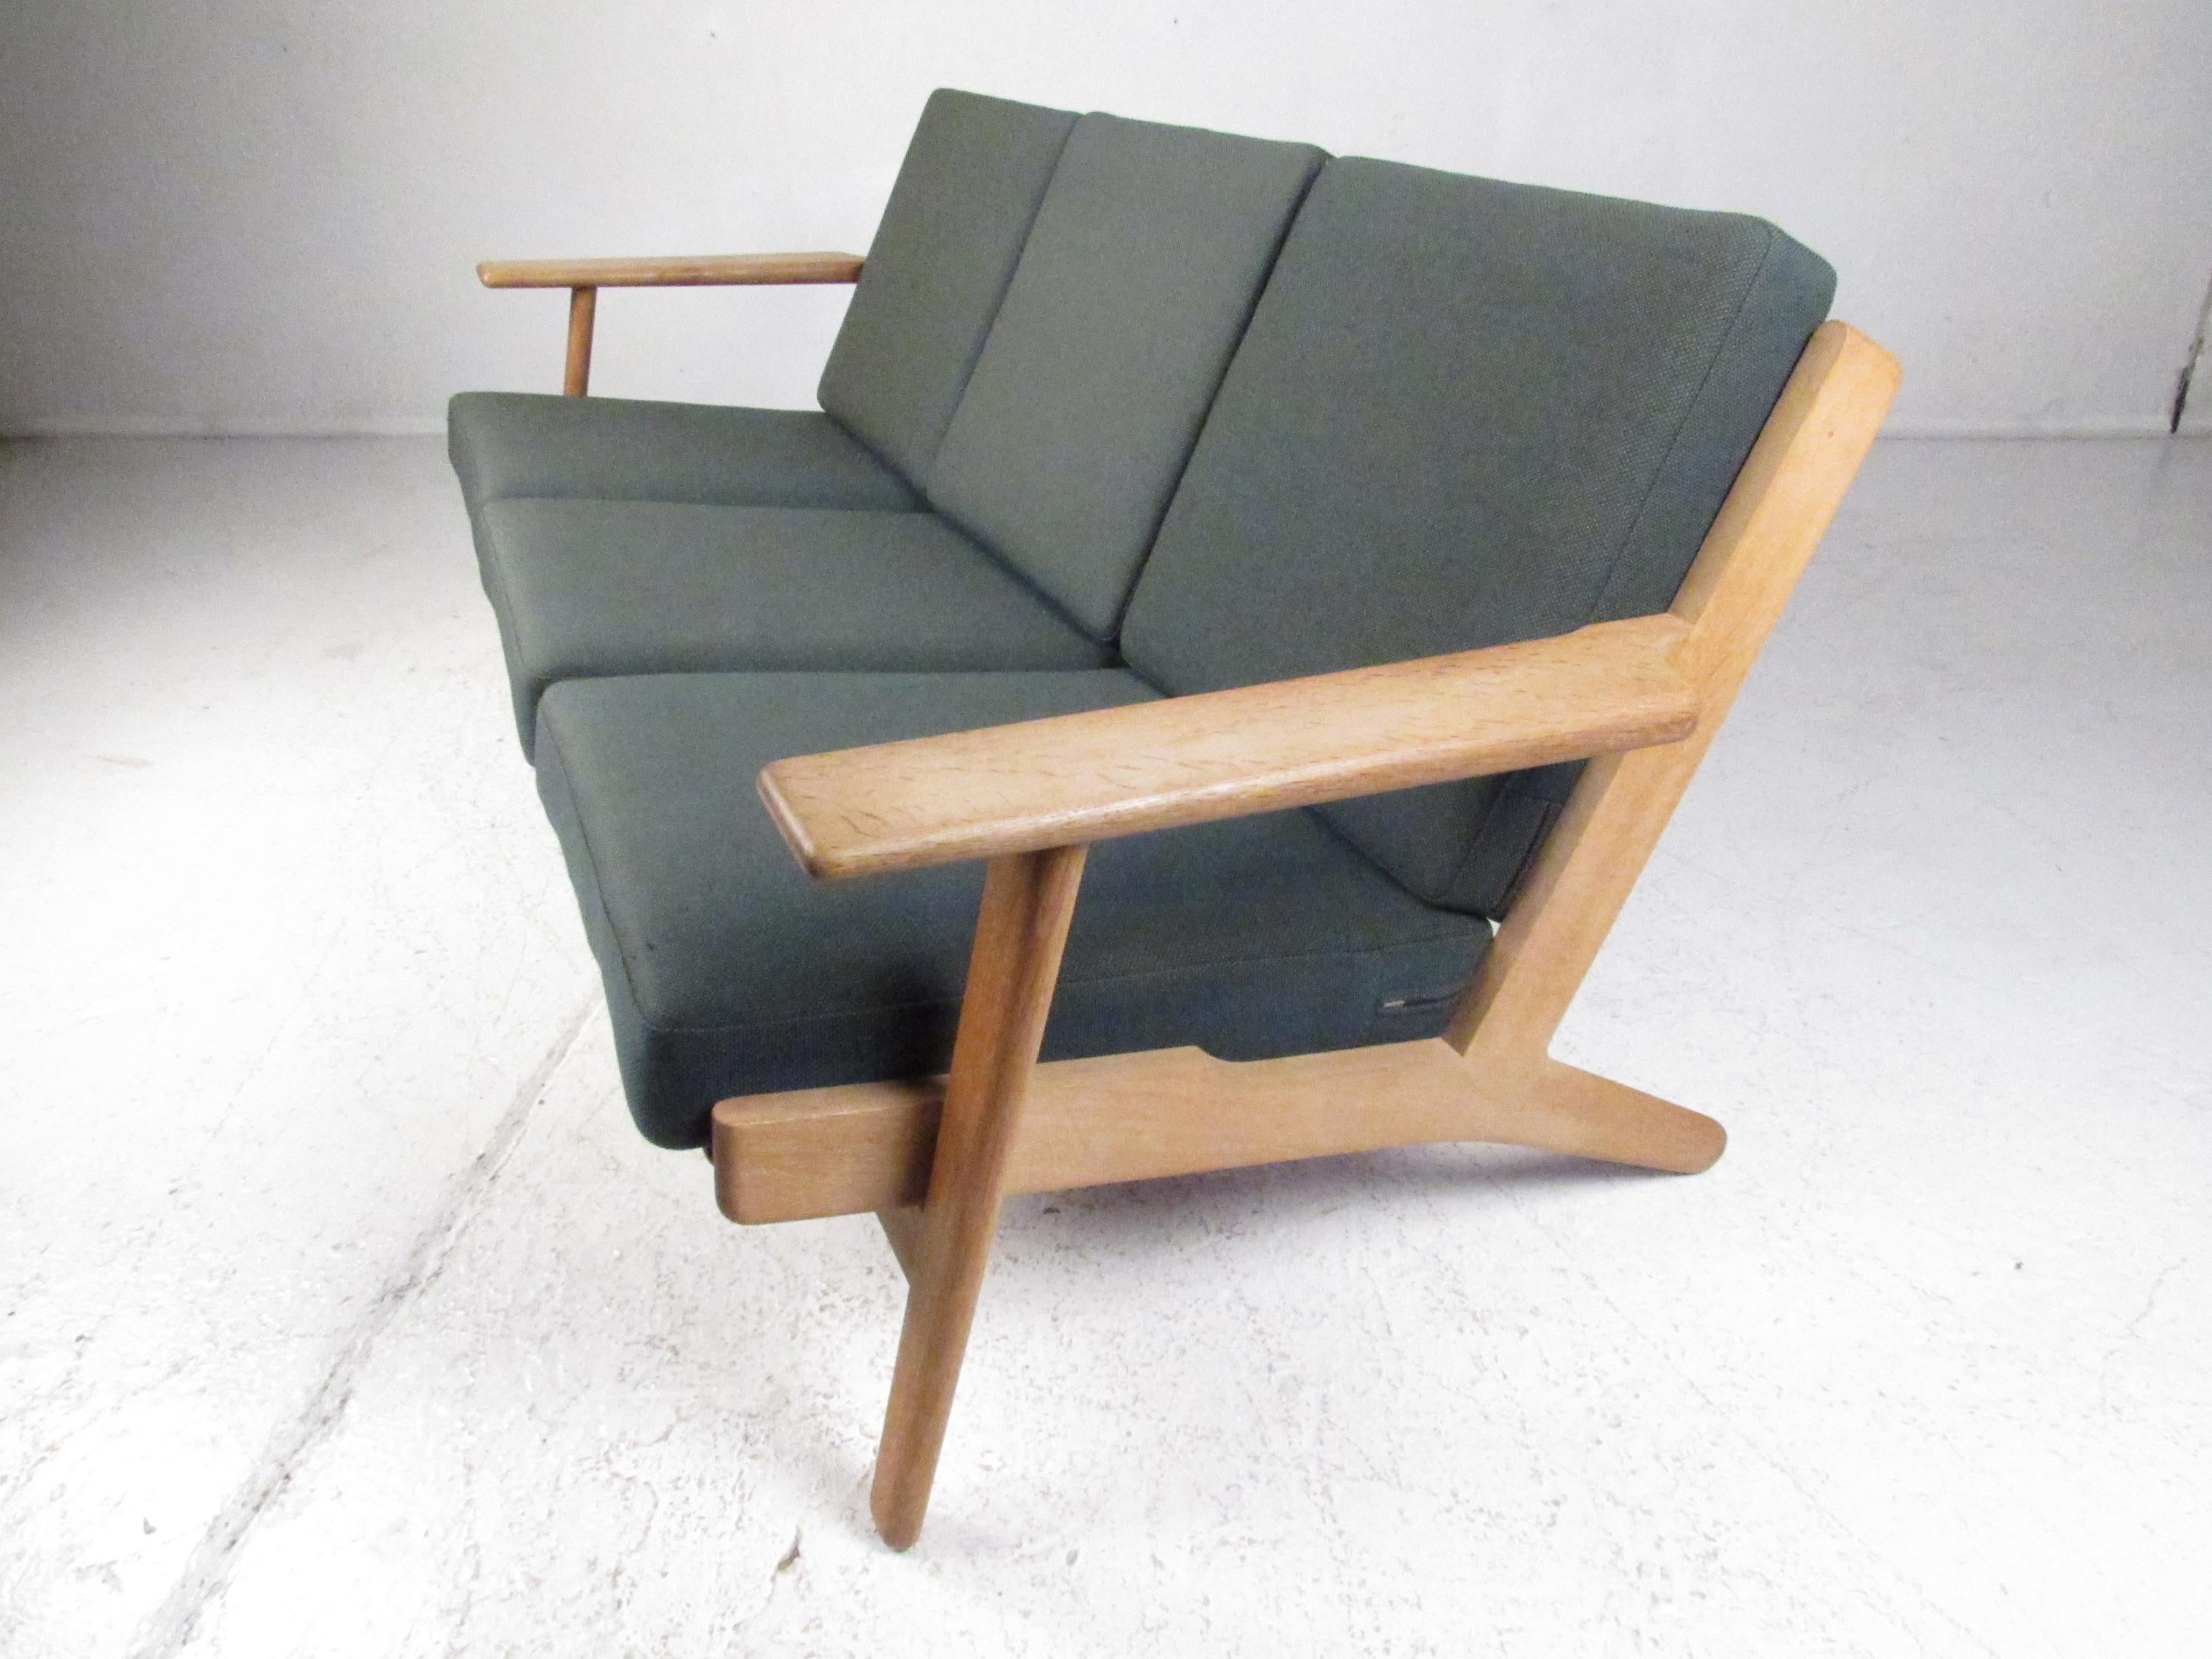 This beautiful vintage modern three seat sofa boasts a solid blonde oak frame with wide sculpted arm rests and splayed legs. A comfortable sofa with six removable cushions covered in a plush green fabric. This well made Danish piece was designed by